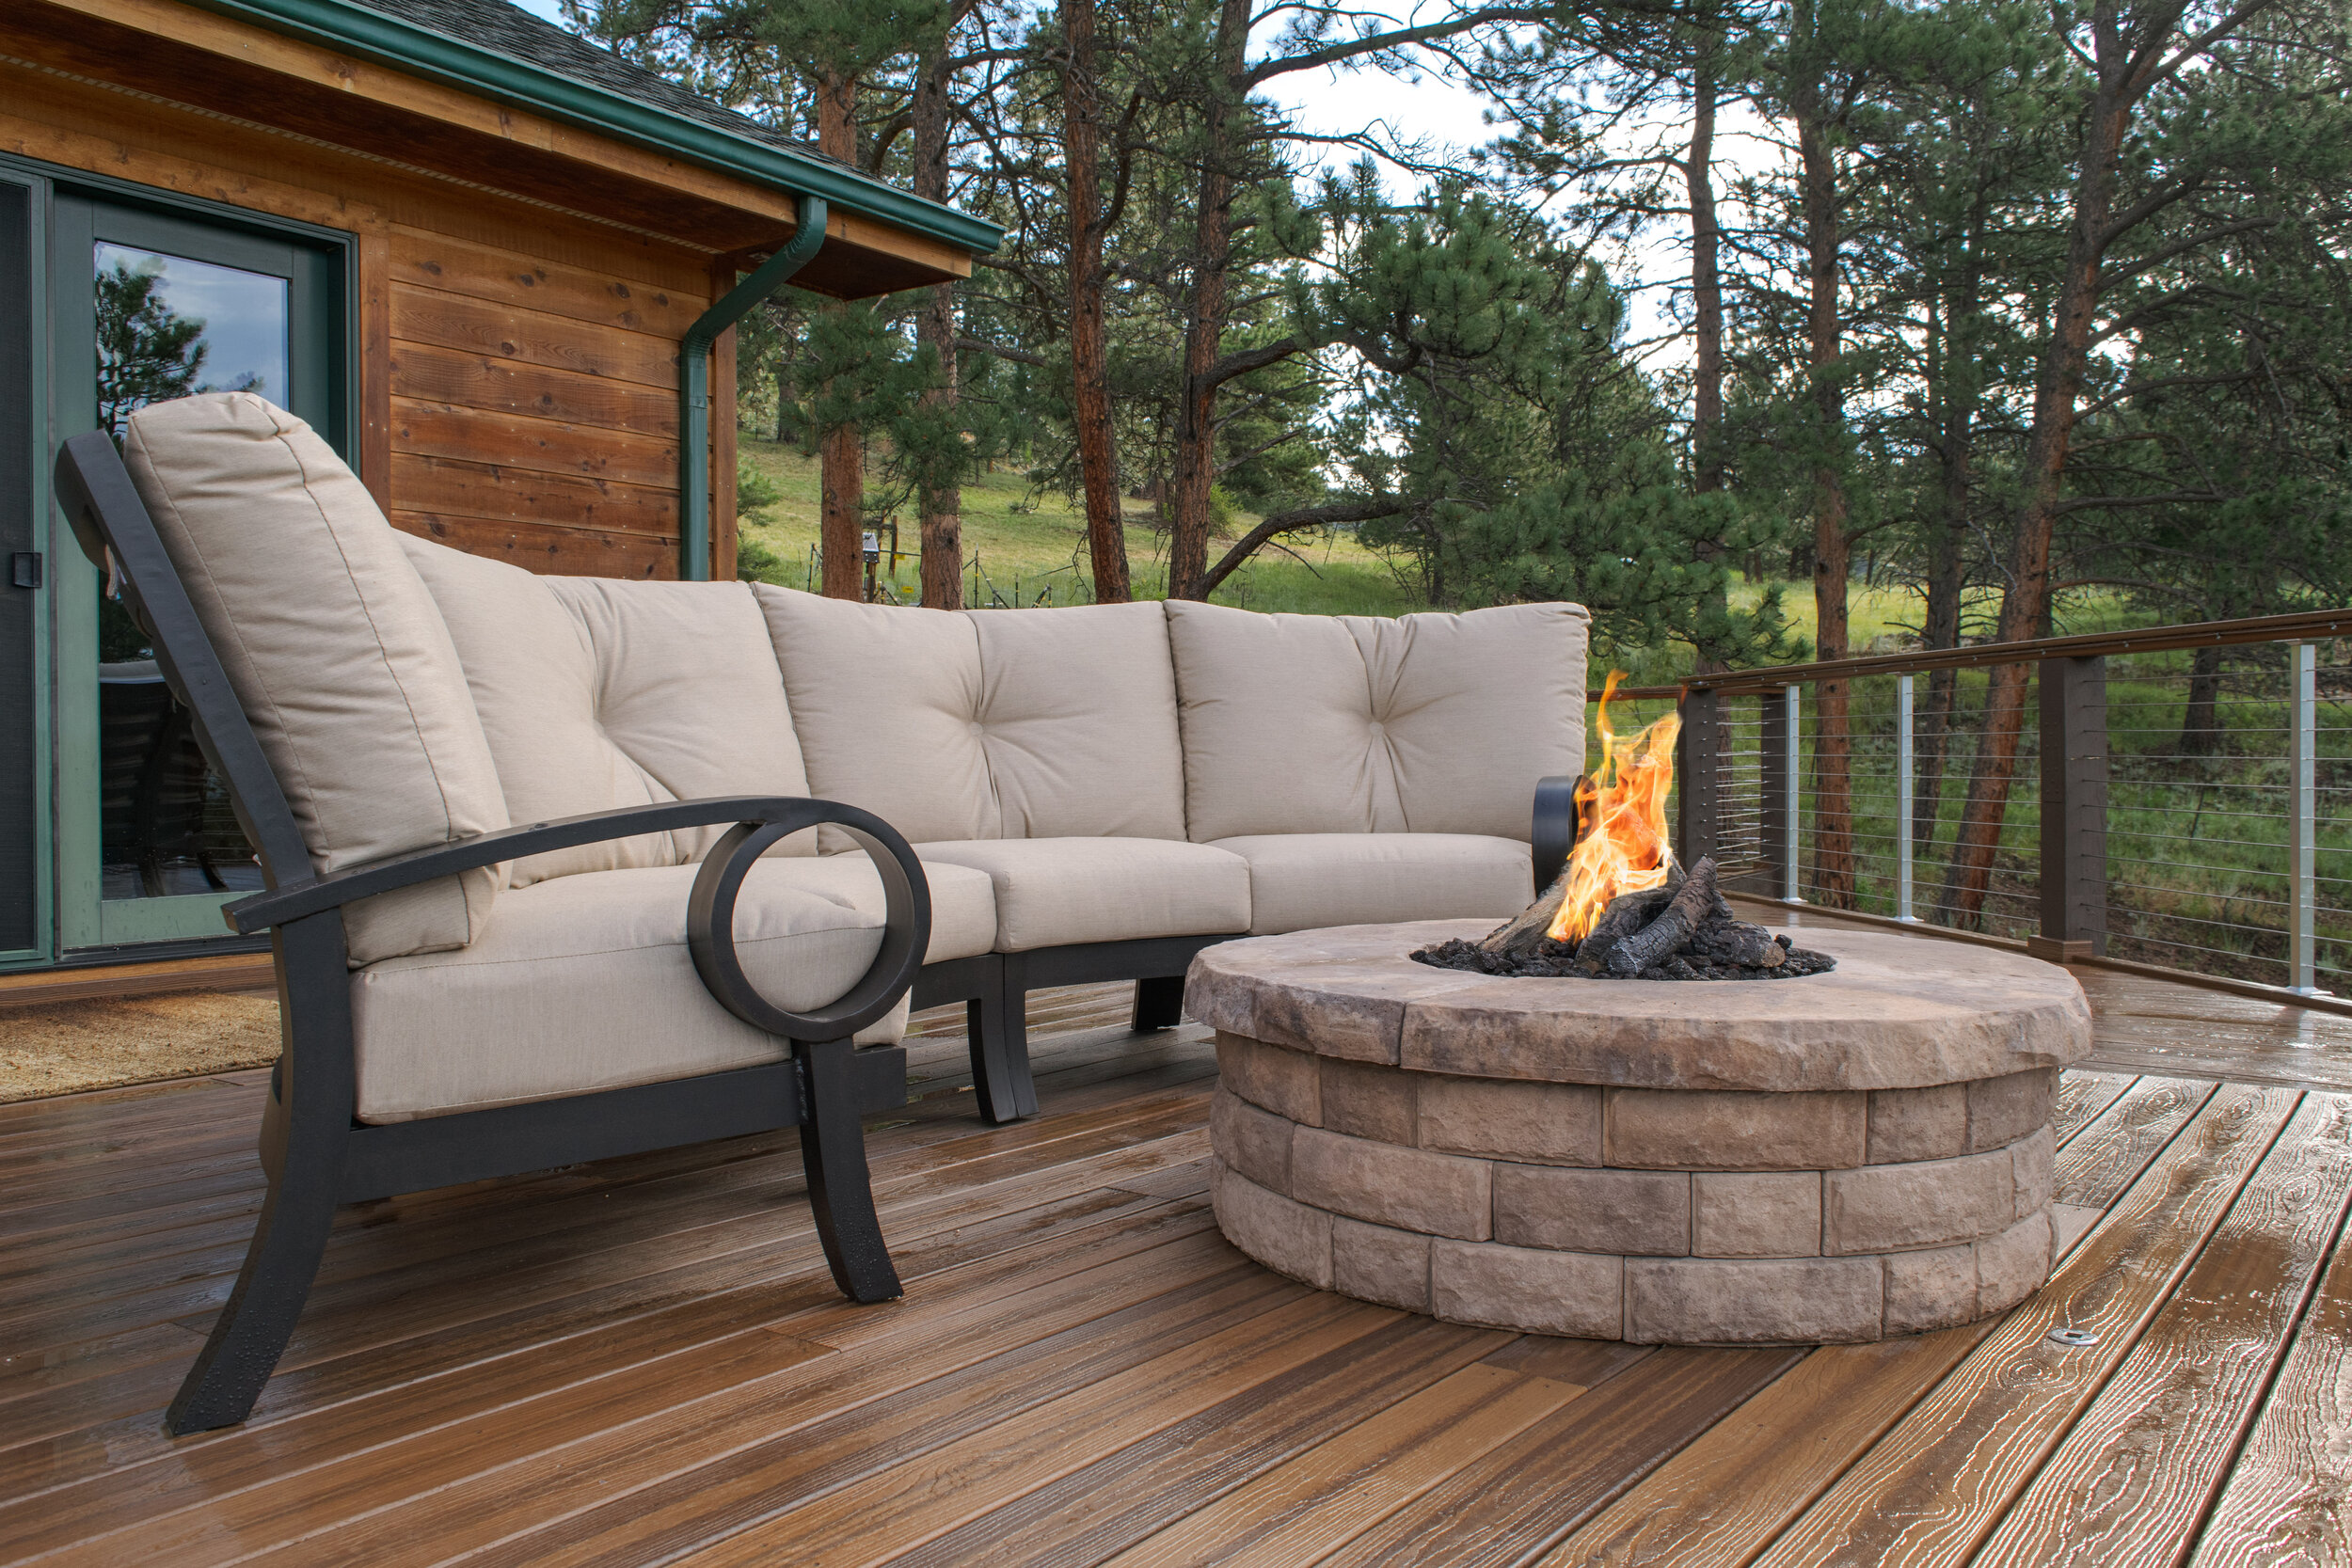 Outdoor Space With A Gas Fire Pit, How To Safely Use A Fire Pit On Deck